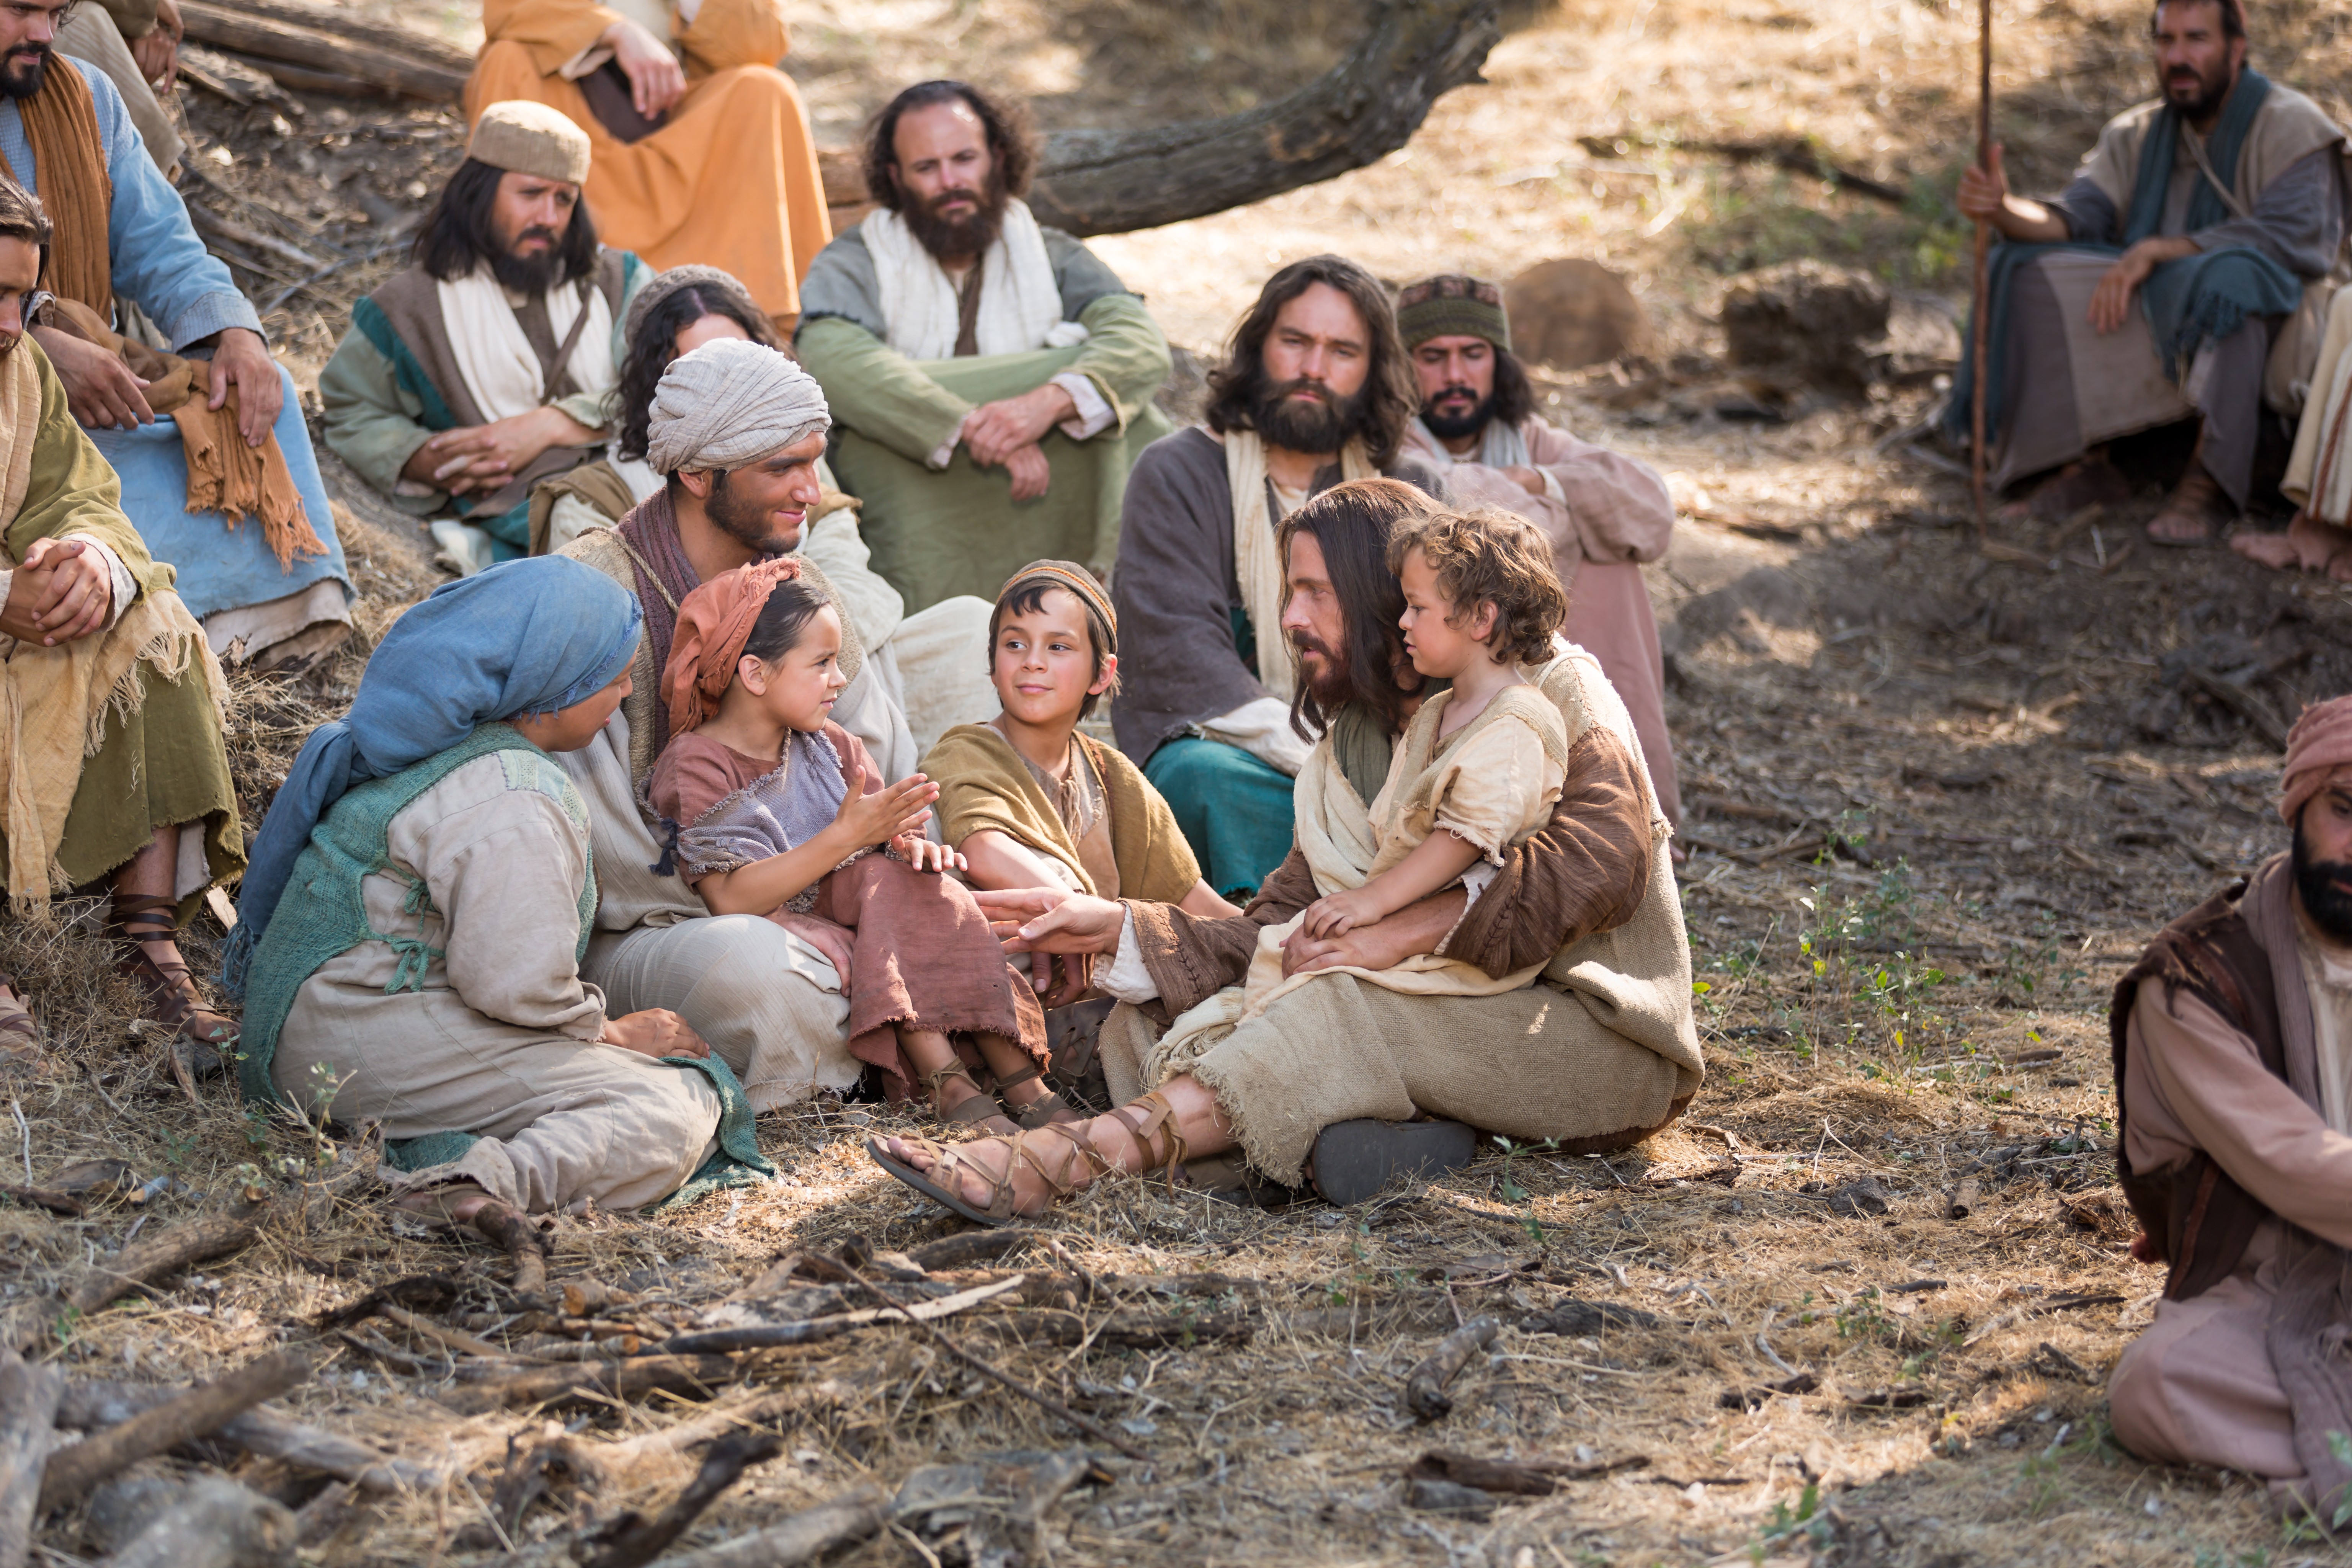 Jesus is sitting down on the ground with a young boy in his lap and surrounded by mothers and other people.  Outtakes include Jesus holding children and walking with them, his disciples with him, Jesus and Peter, Jesus with Peter and James and some of the children.